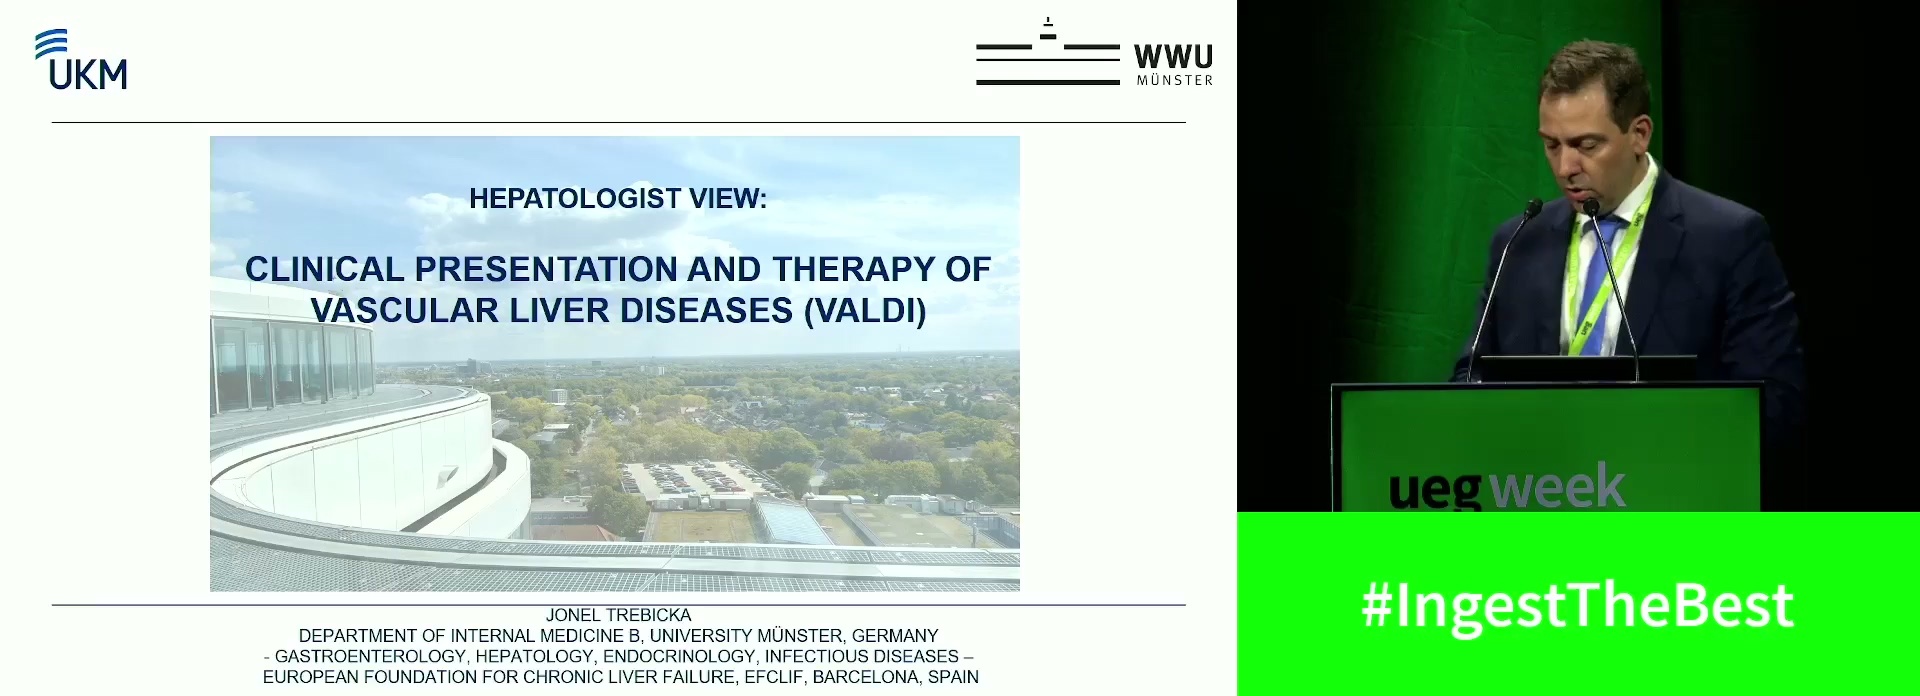 Hepatologist view: Clinical presentation and therapy of vascular liver diseases